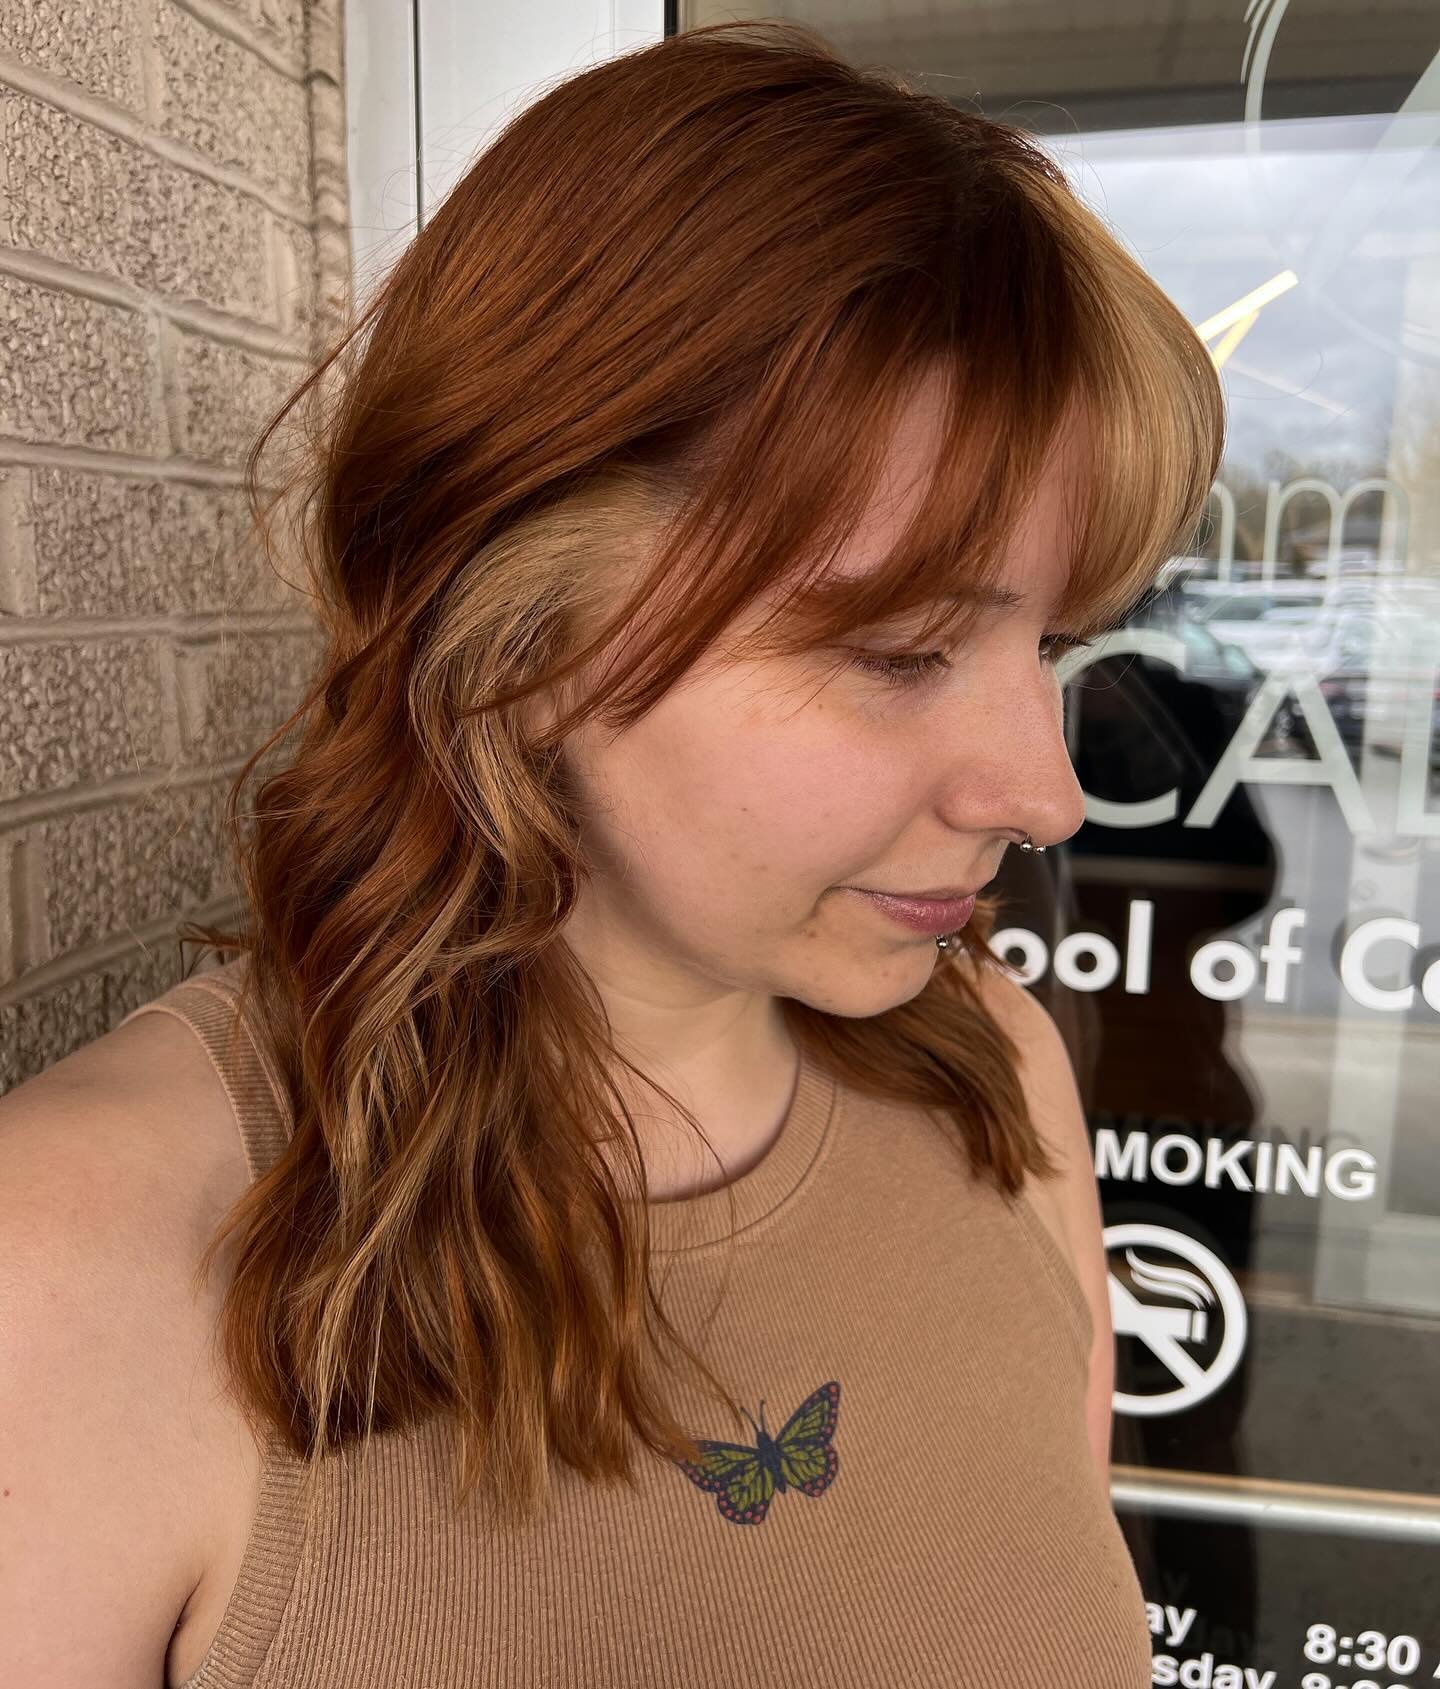 Obsessed with how this color block turned out!! The blonde and copper look amazing together!
-
-
-
-
-
-
-
#cosstudent #cosmetology #copper #copperhair #copperblonde #colorblock #hairsylist #altstylist #hairstylist